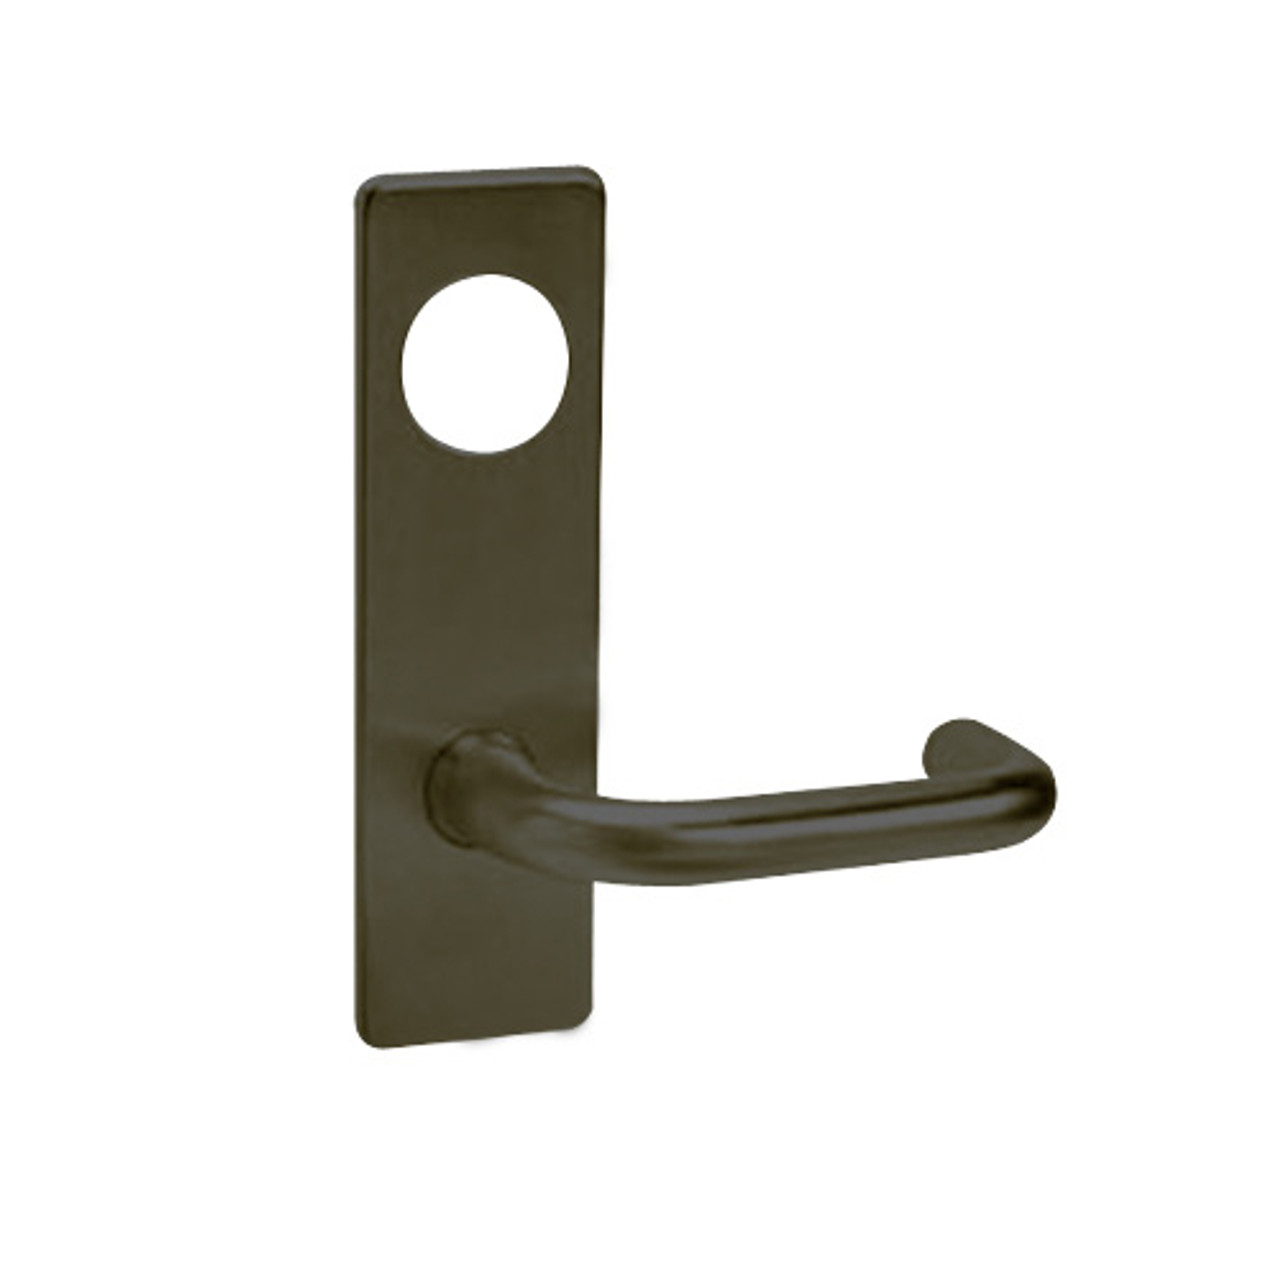 ML2058-LSR-613-M31 Corbin Russwin ML2000 Series Mortise Entrance Holdback Trim Pack with Lustra Lever in Oil Rubbed Bronze